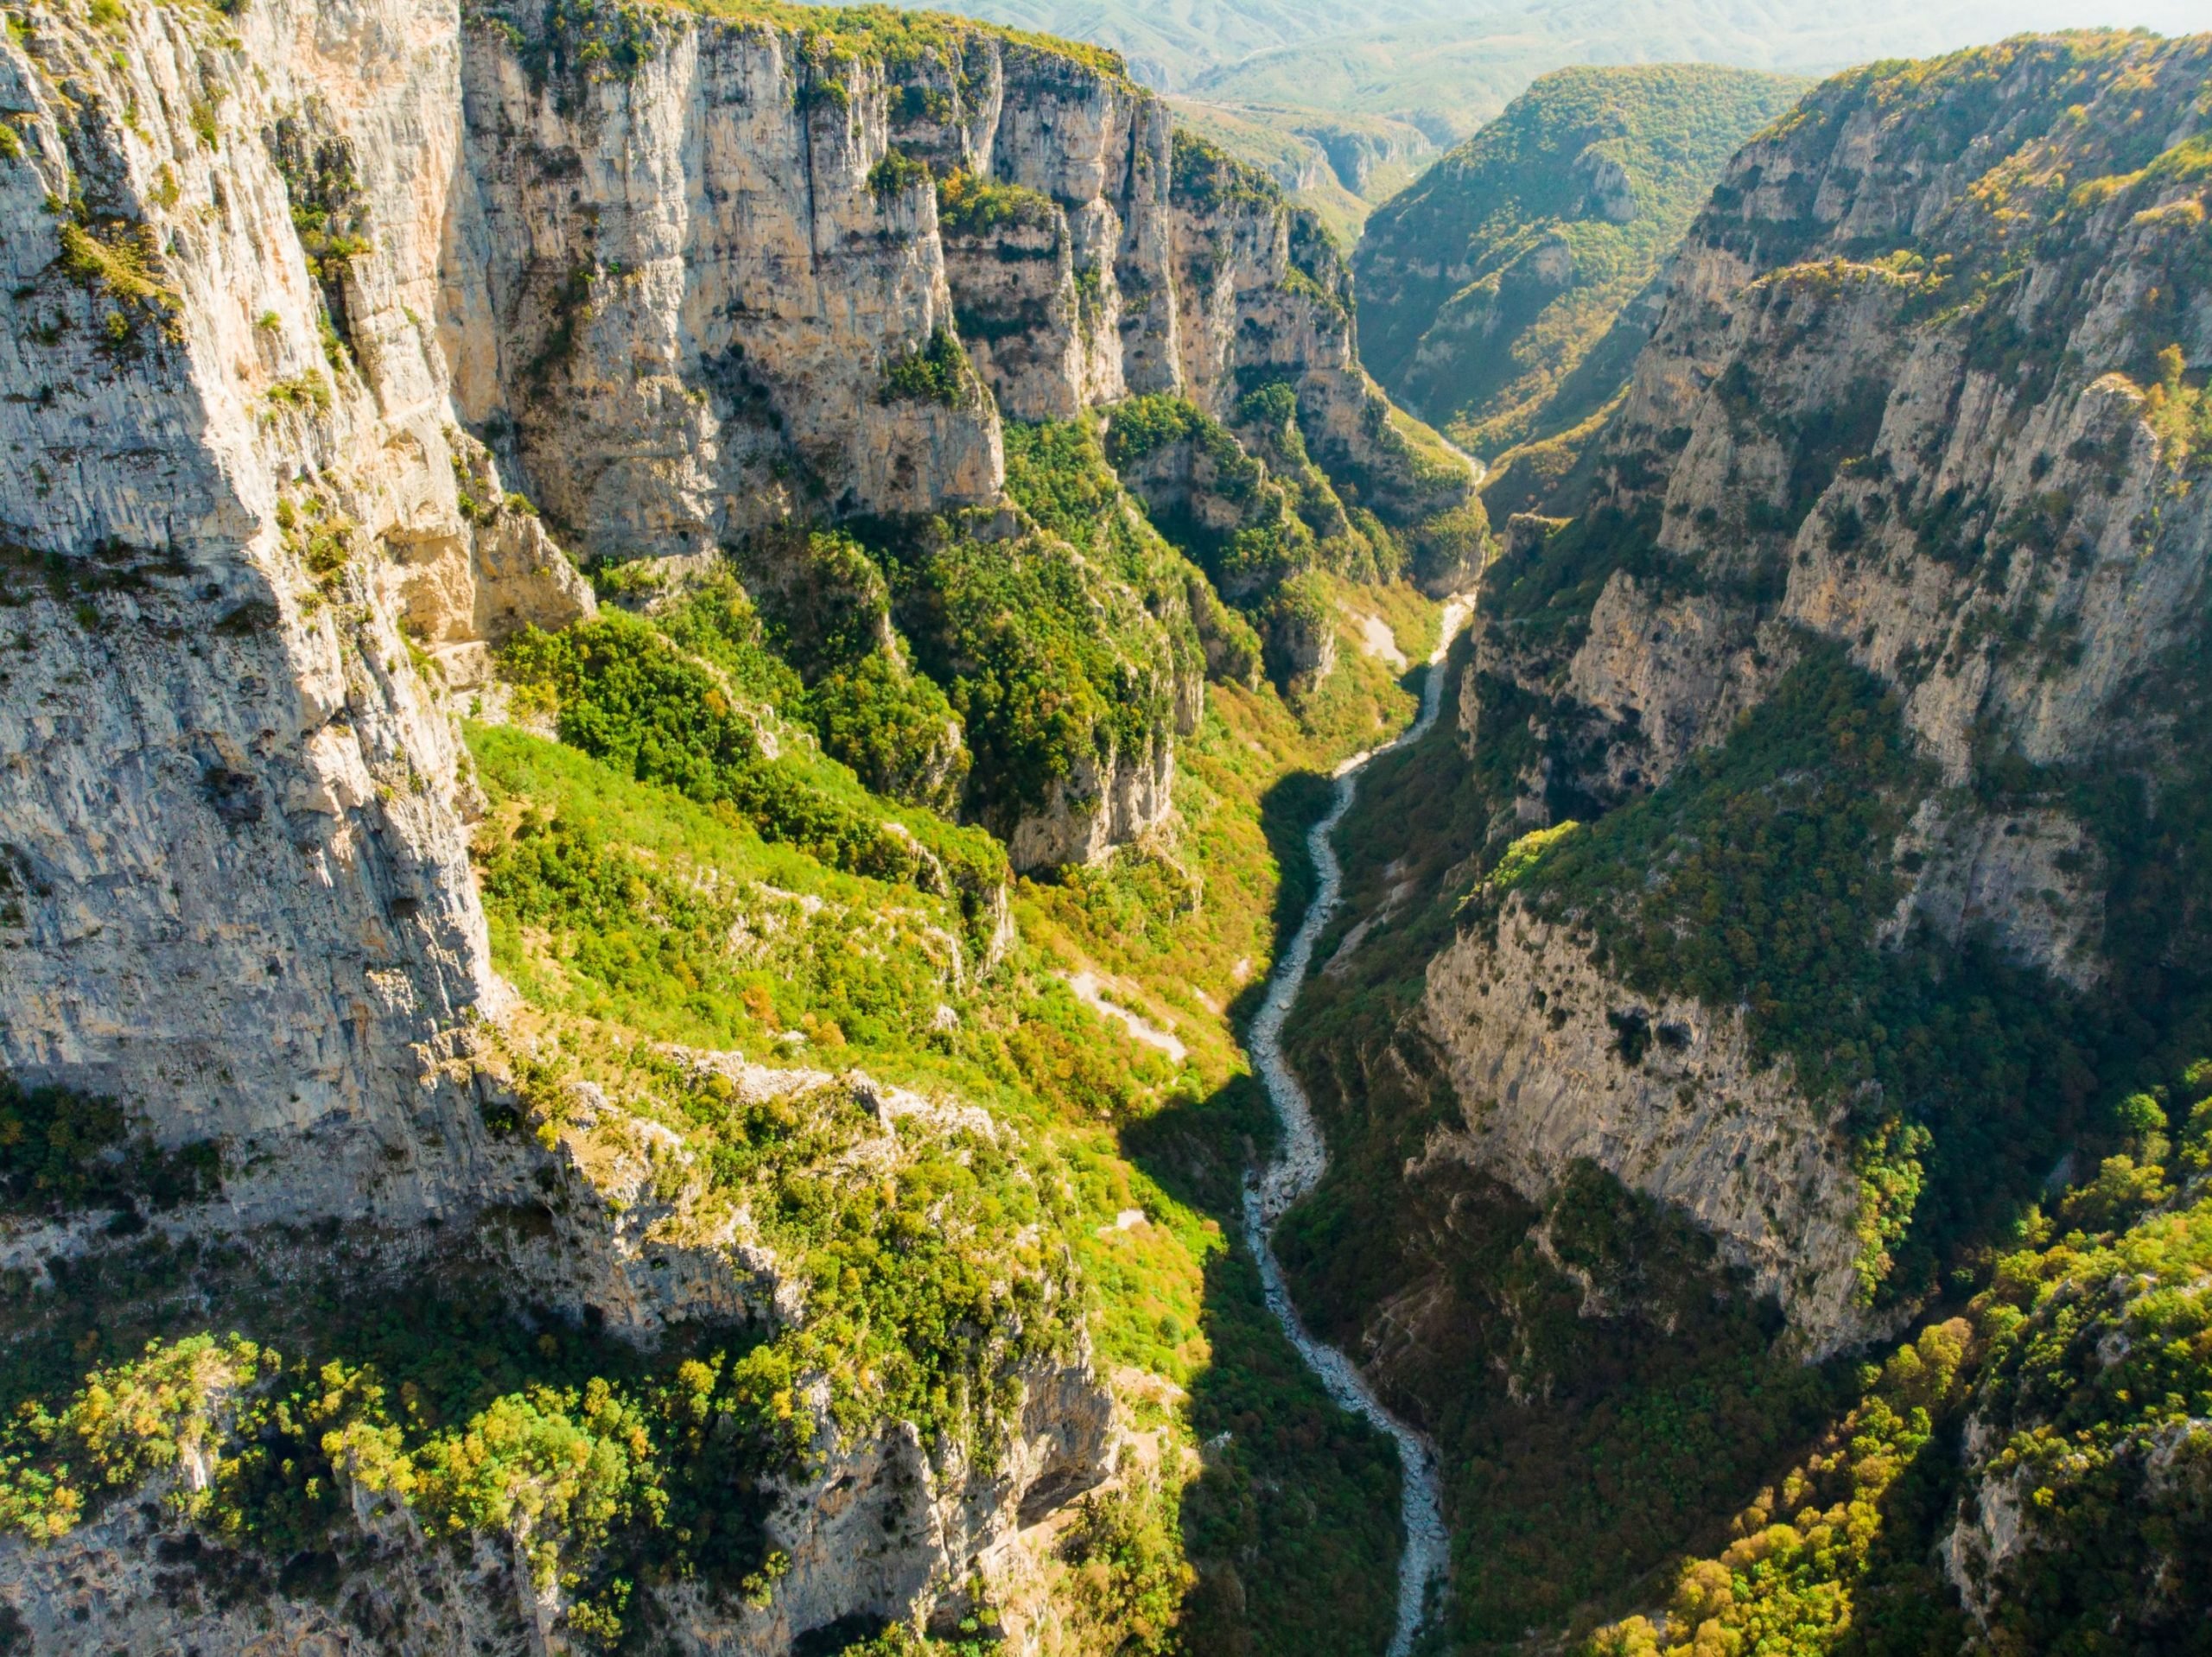 Hiking in Greece can mean anything from the Vikos Gorge, above, to a coastal dream